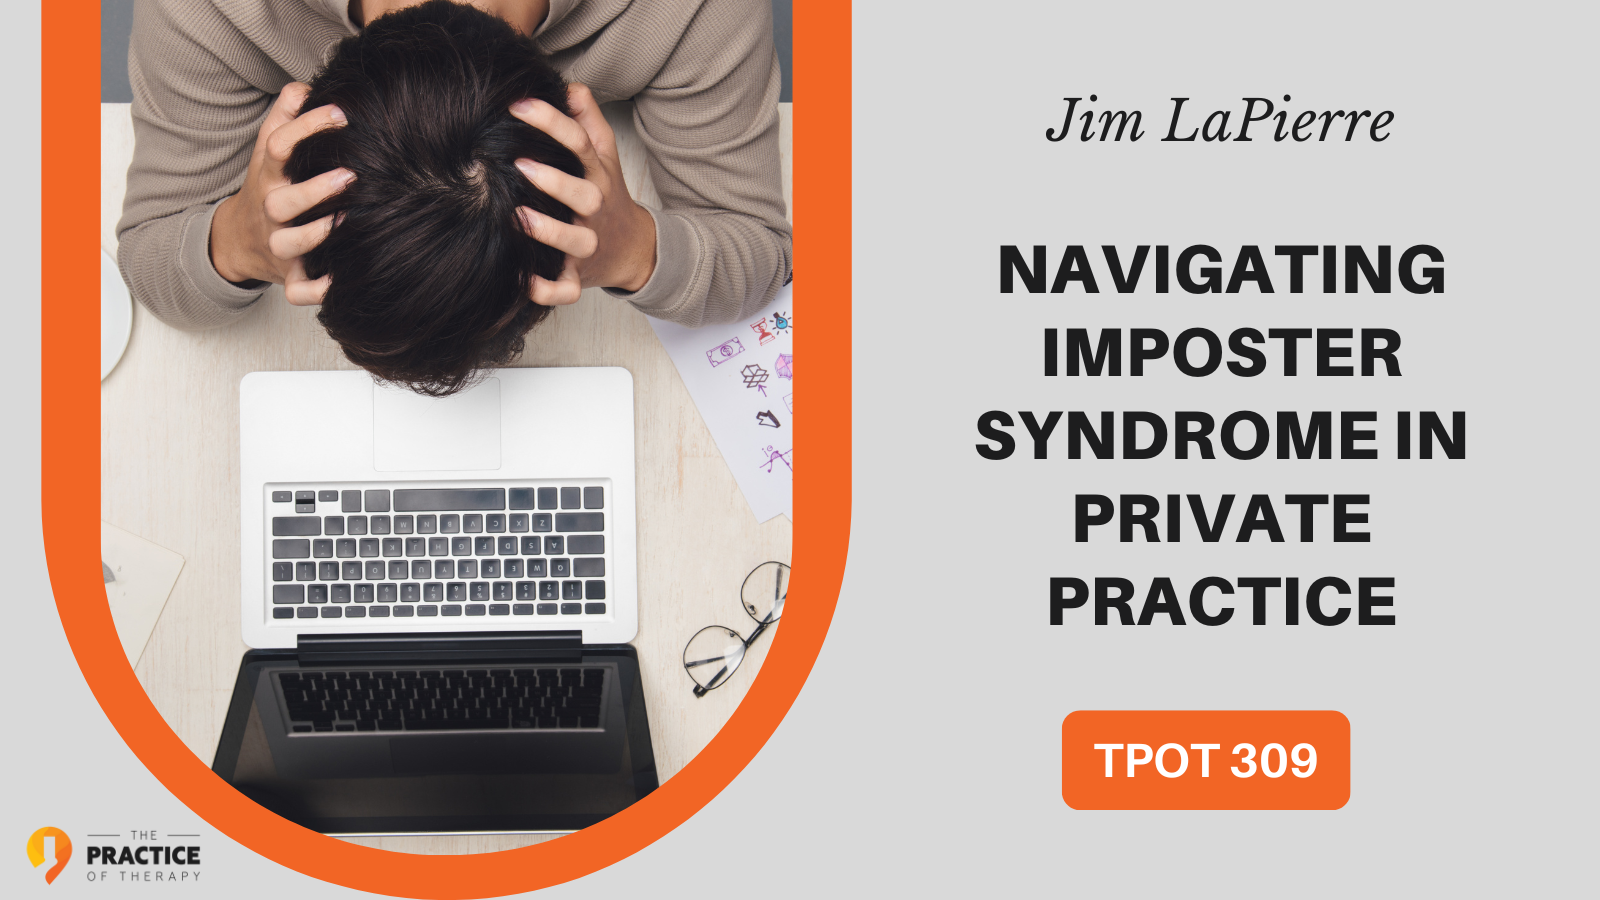 Jim LaPierre Navigating Imposter Syndrome in Private Practice TPOT 309